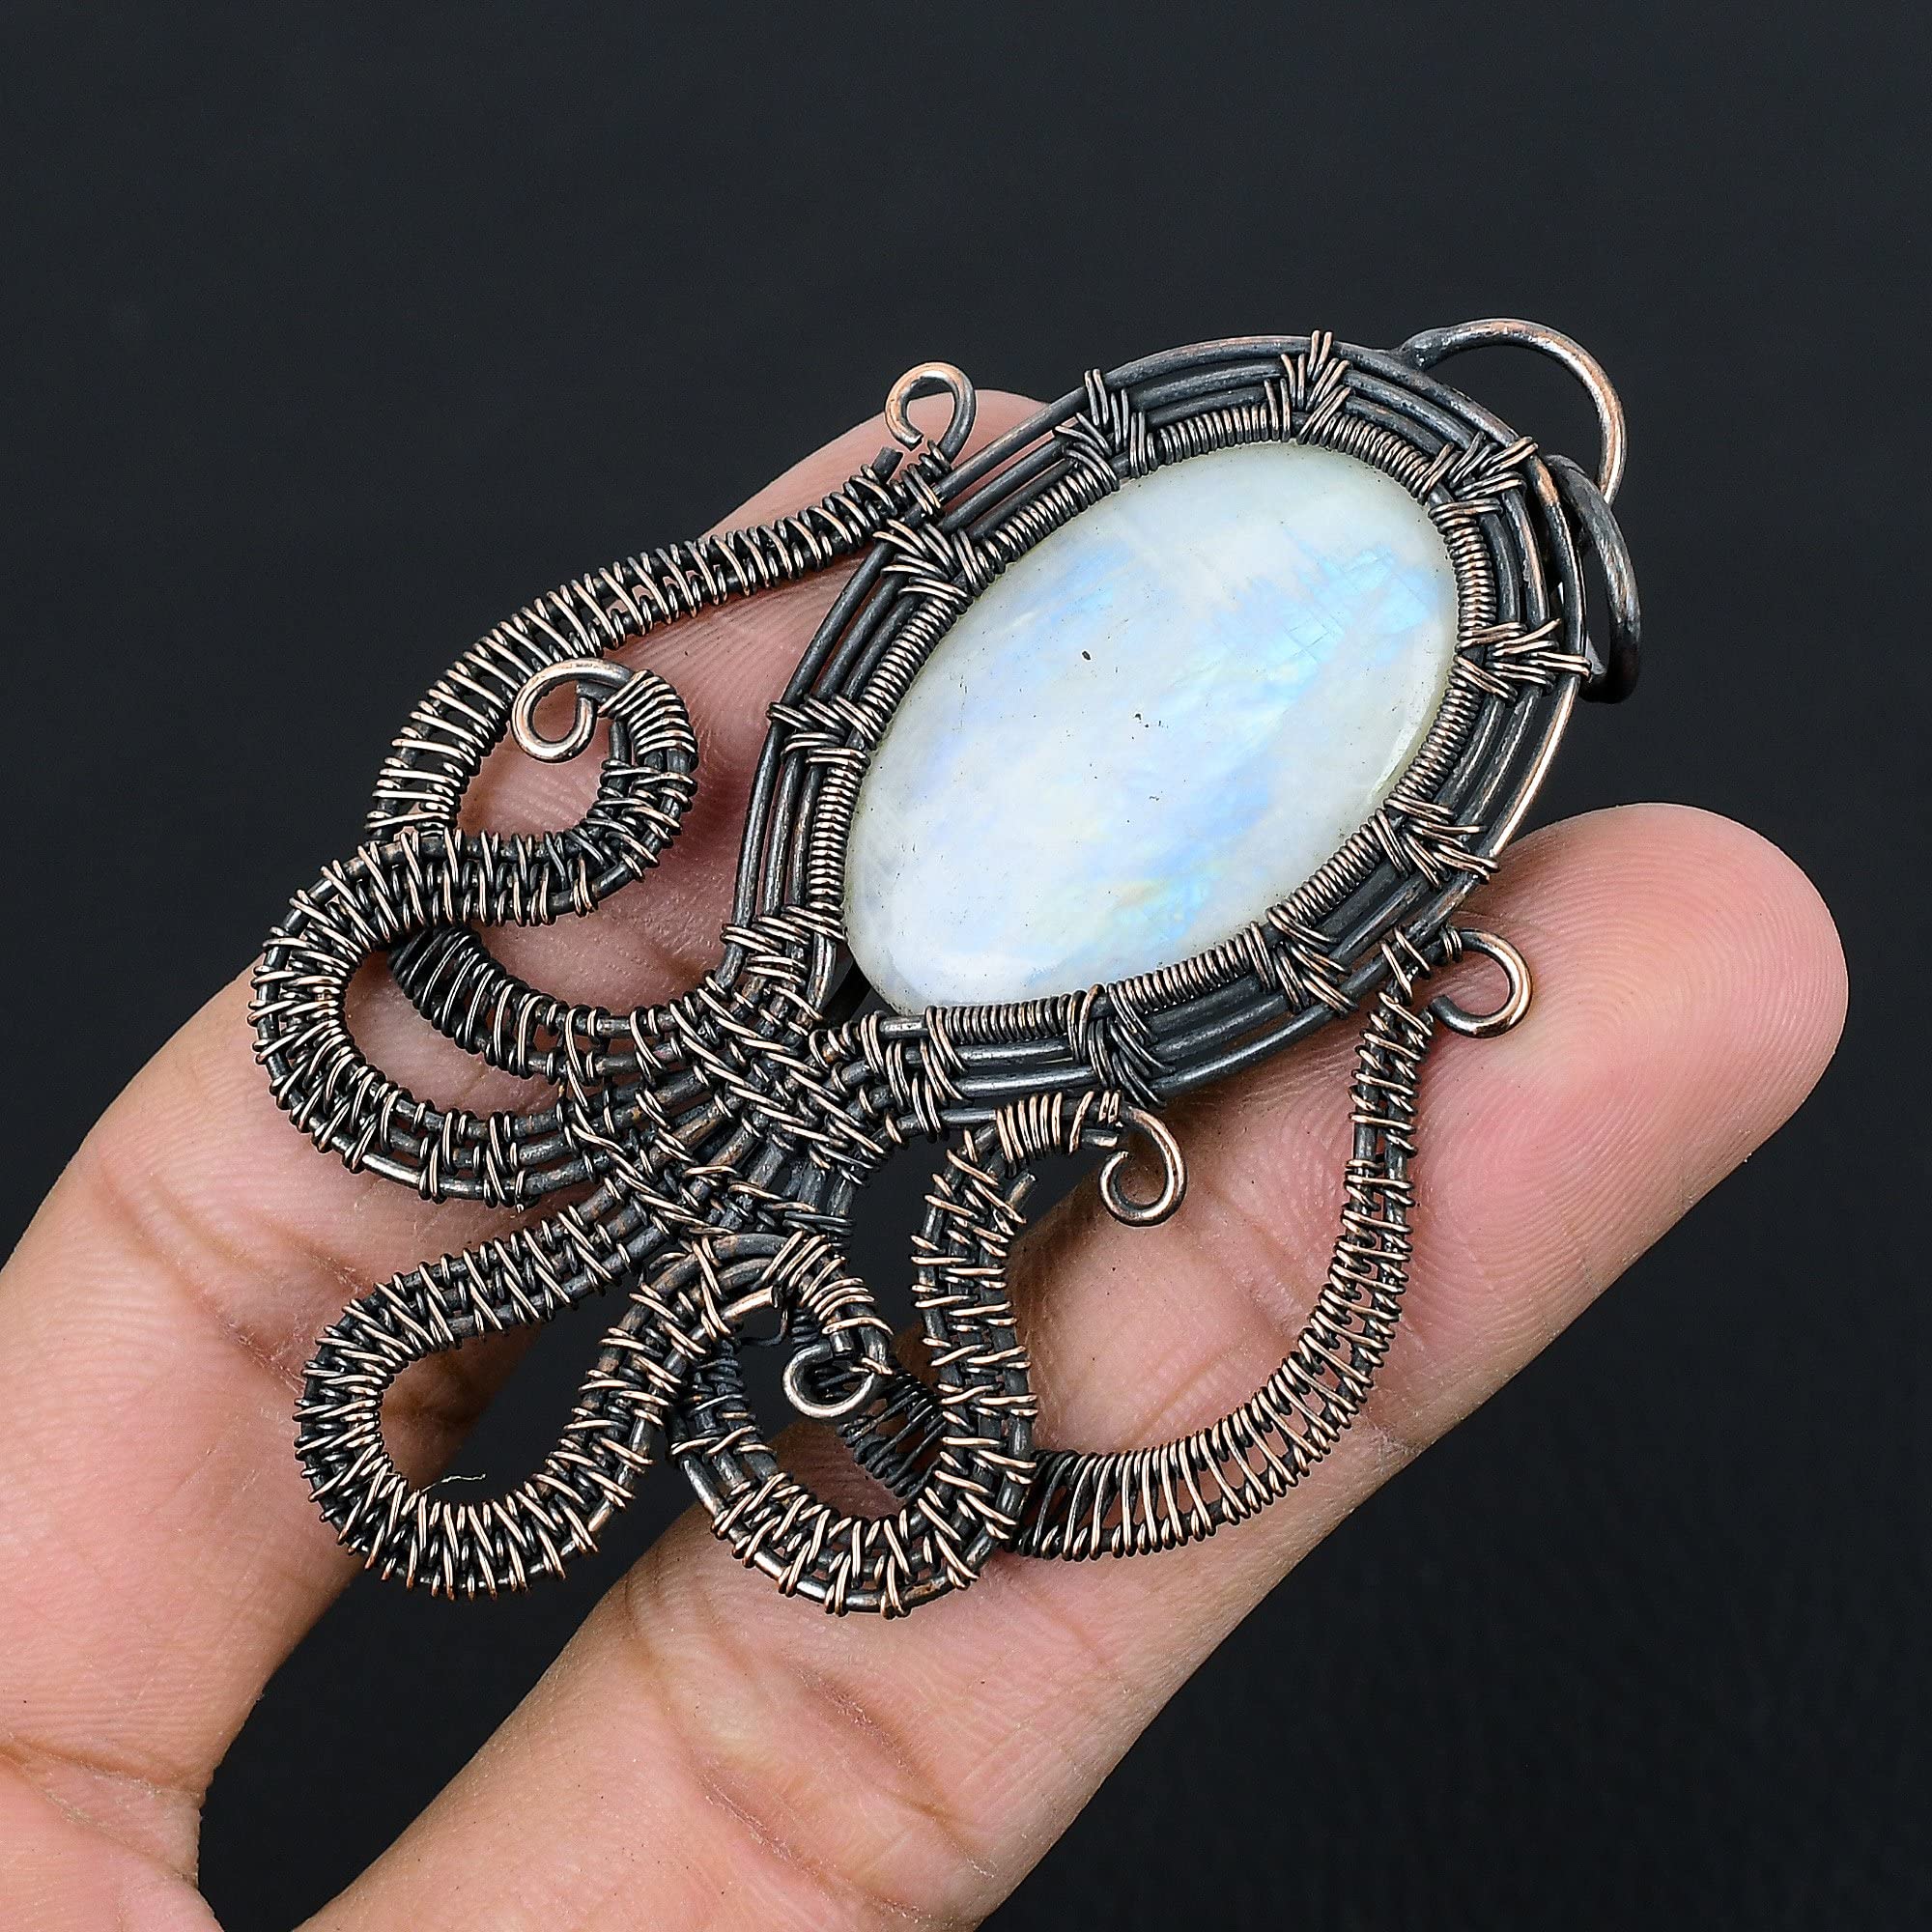 Unleash Your Inner Mermaid with Our Copper Wire Handmade Octopus-Shaped Labradorite Pendant Necklace - 20